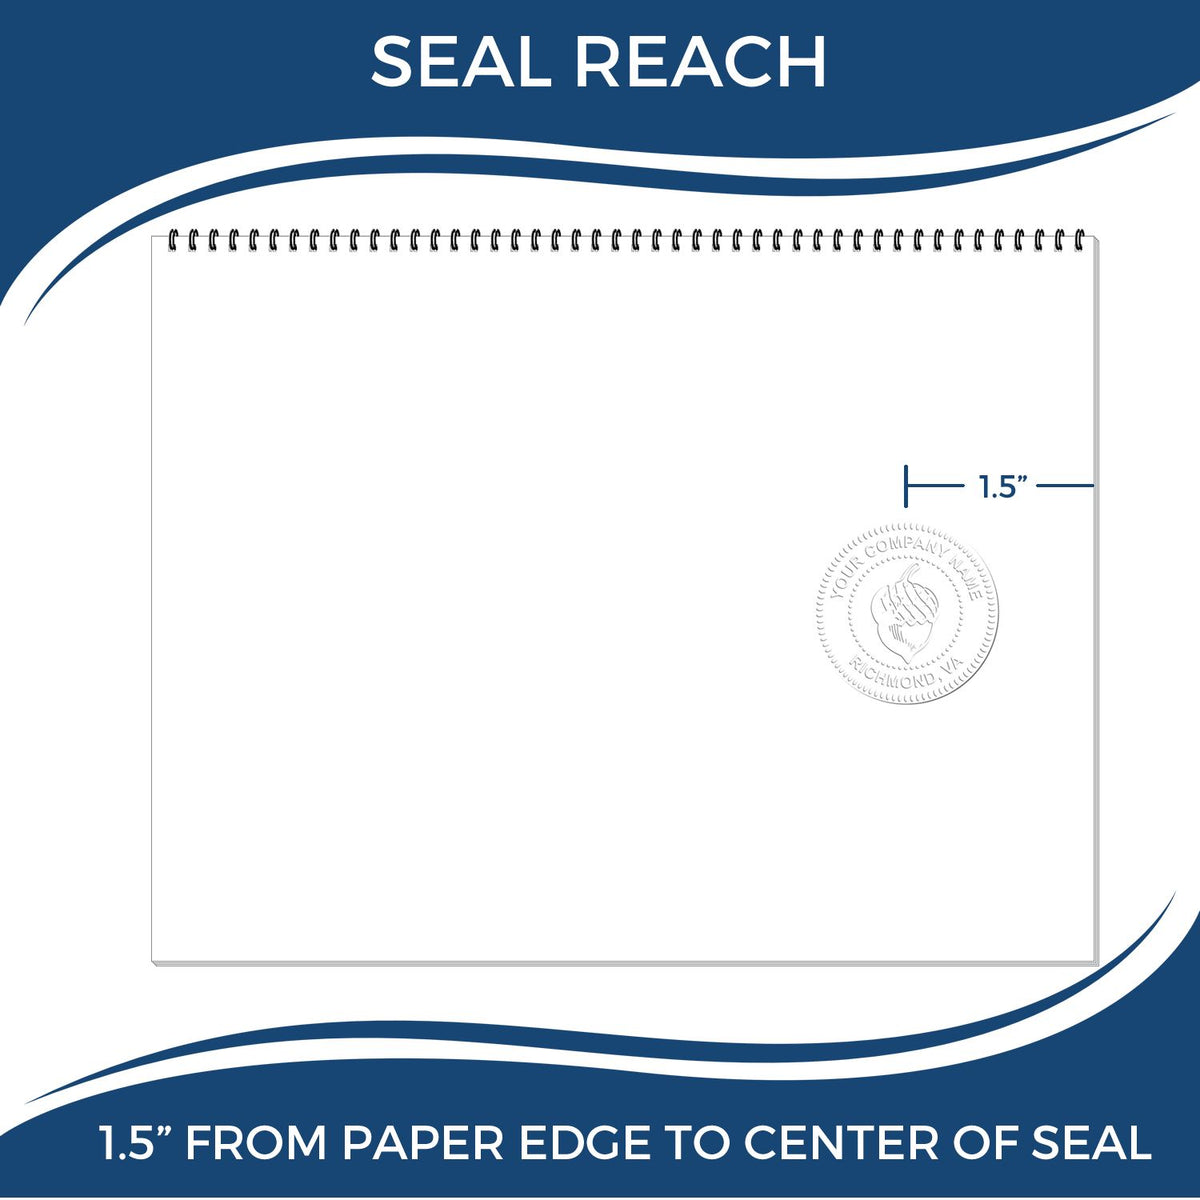 An infographic showing the seal reach which is represented by a ruler and a miniature seal image of the Arizona Desk Surveyor Seal Embosser